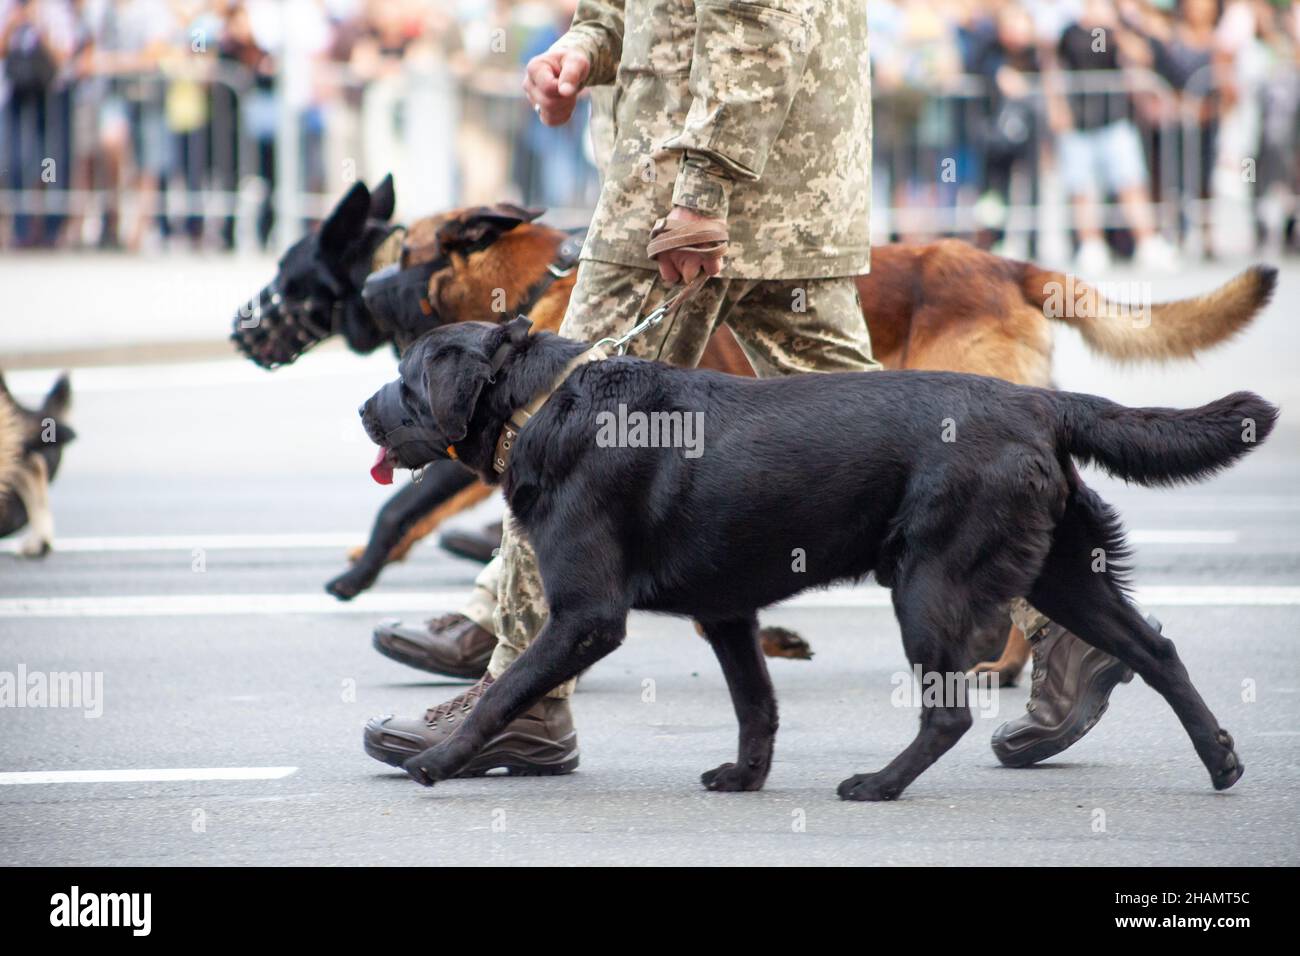 Dogs in the service of the state. Dog black labrador border guard on the street. Watchdog guard sniffer. Purebred dog on parade with the military. Stock Photo